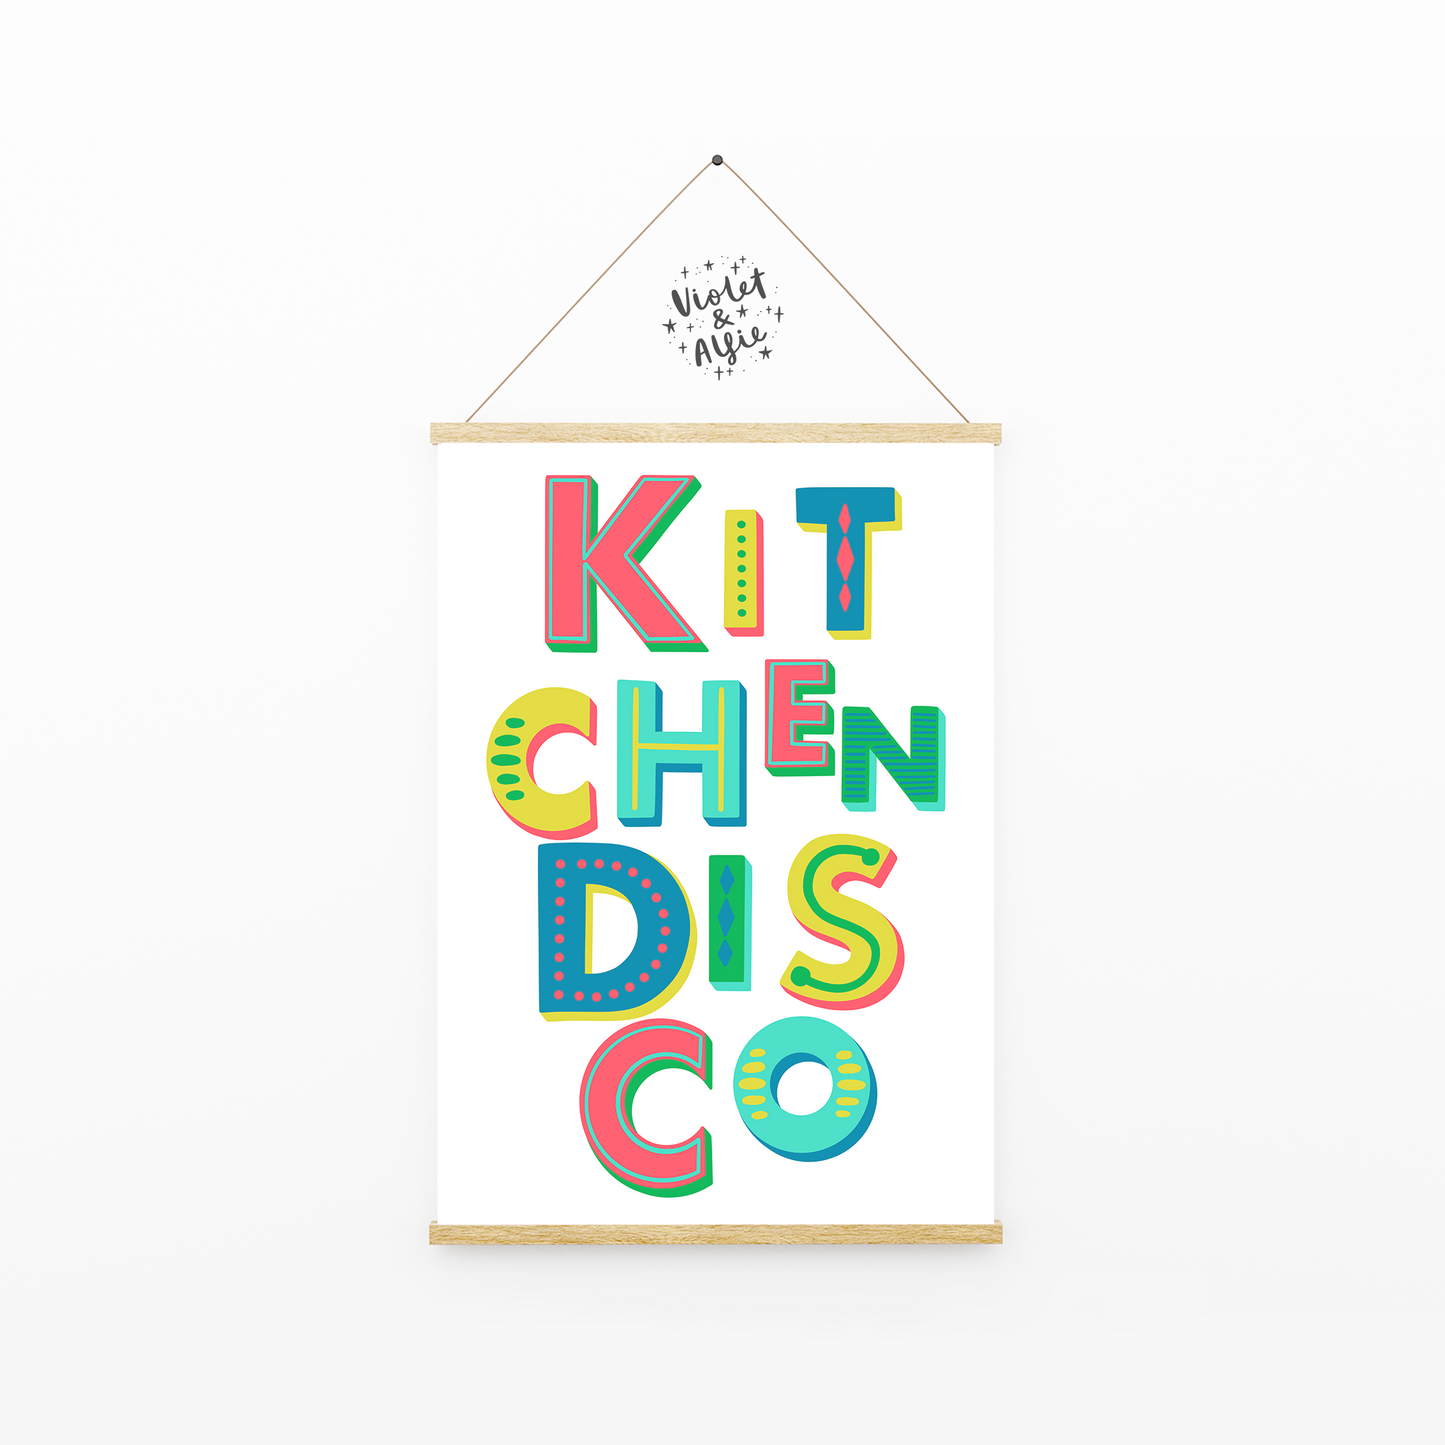 kitchen disco print, dance it out print, rainbow decor, colourful wall art, hand lettered prints, prints for your home, kitchen decor, happy wall art, quirky wall art, fun wall art, colourful kitchen decor, prints for kitchen